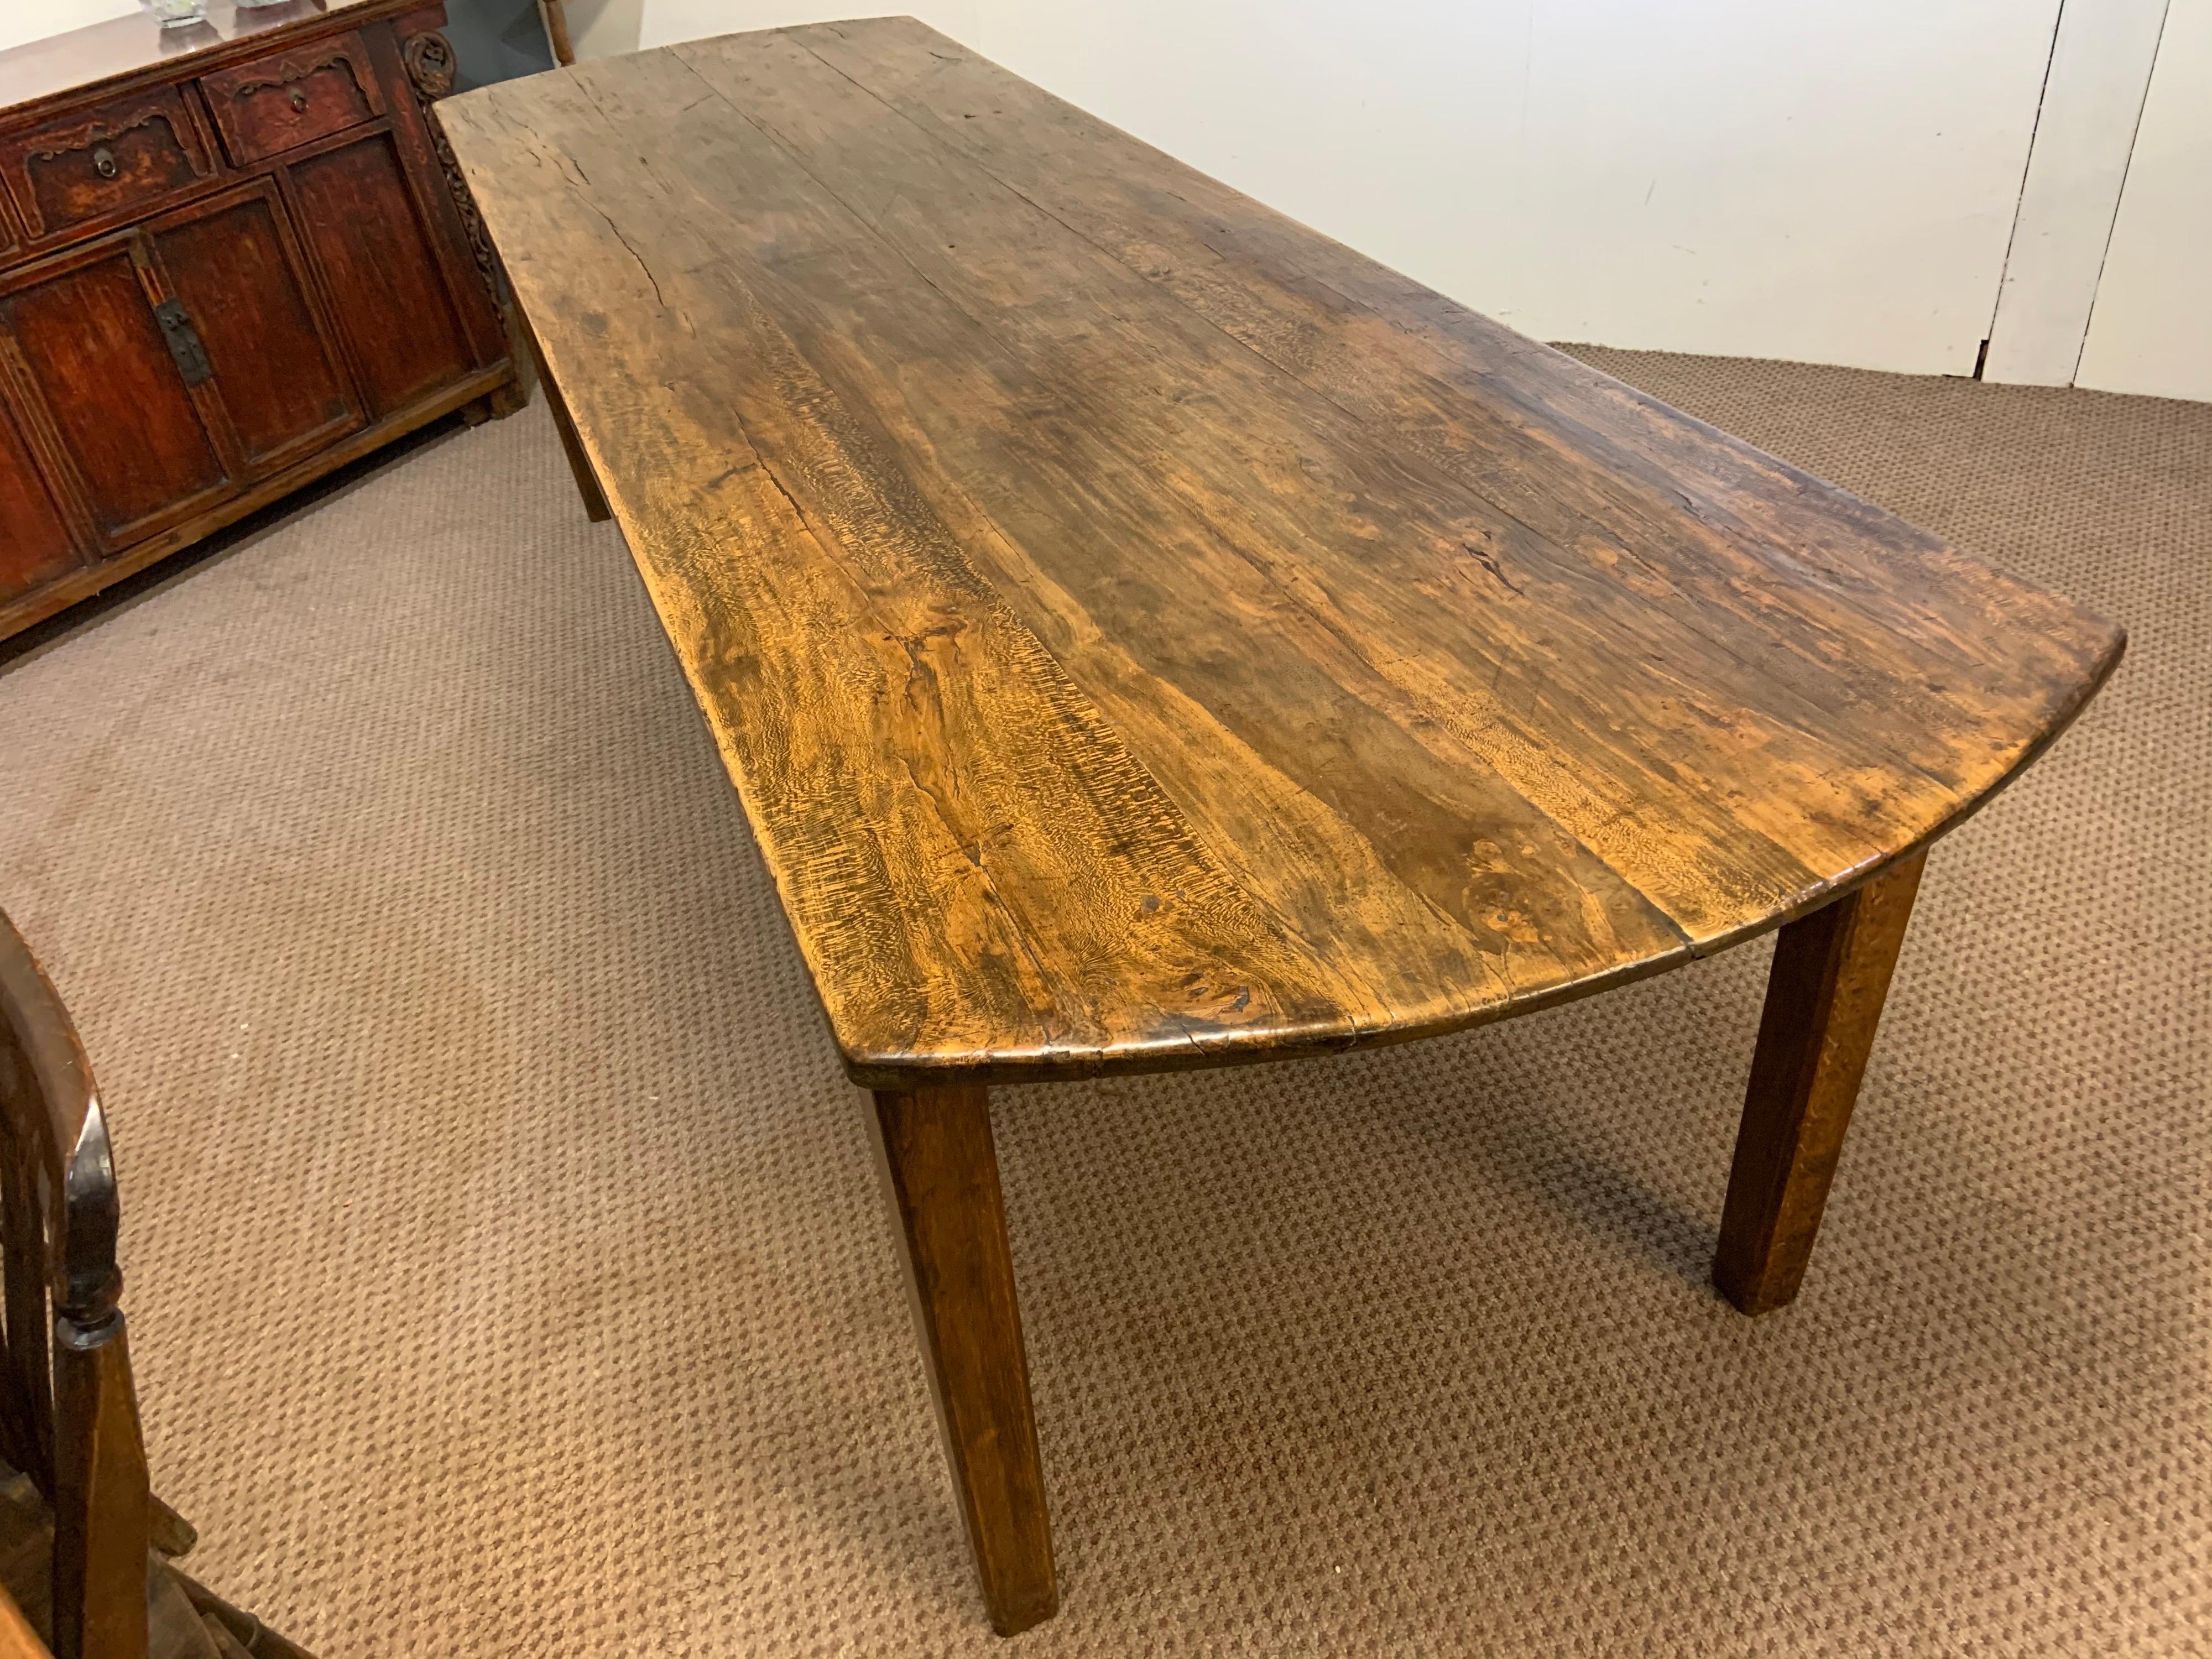 Hand-Crafted 19th Century Large Farmhouse Table with Oval Ends